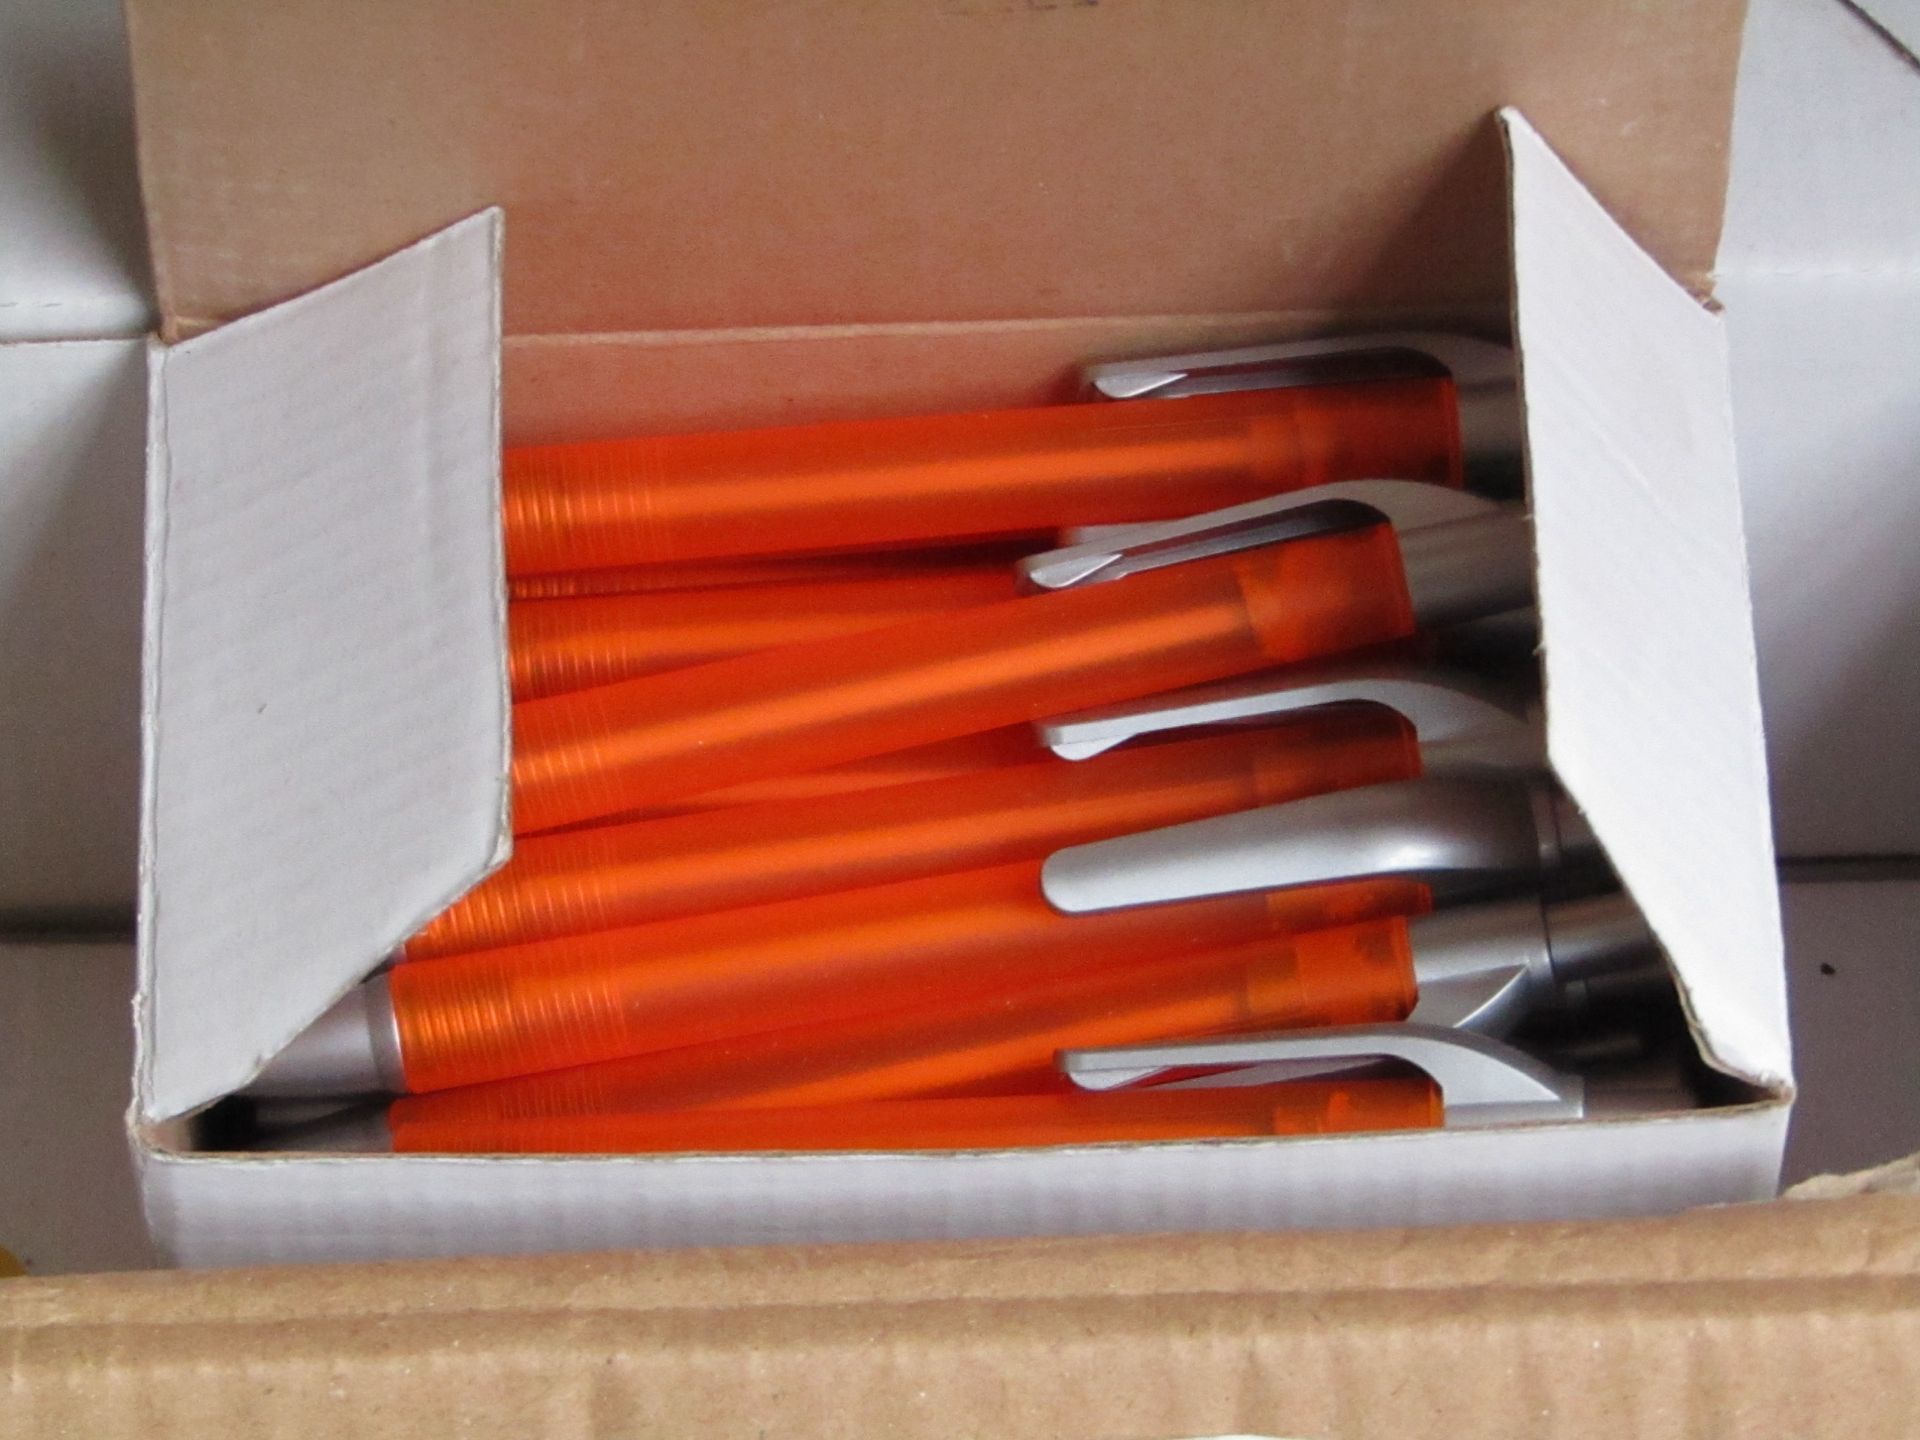 1 x box of 50 Amber, Black ink pens new in box